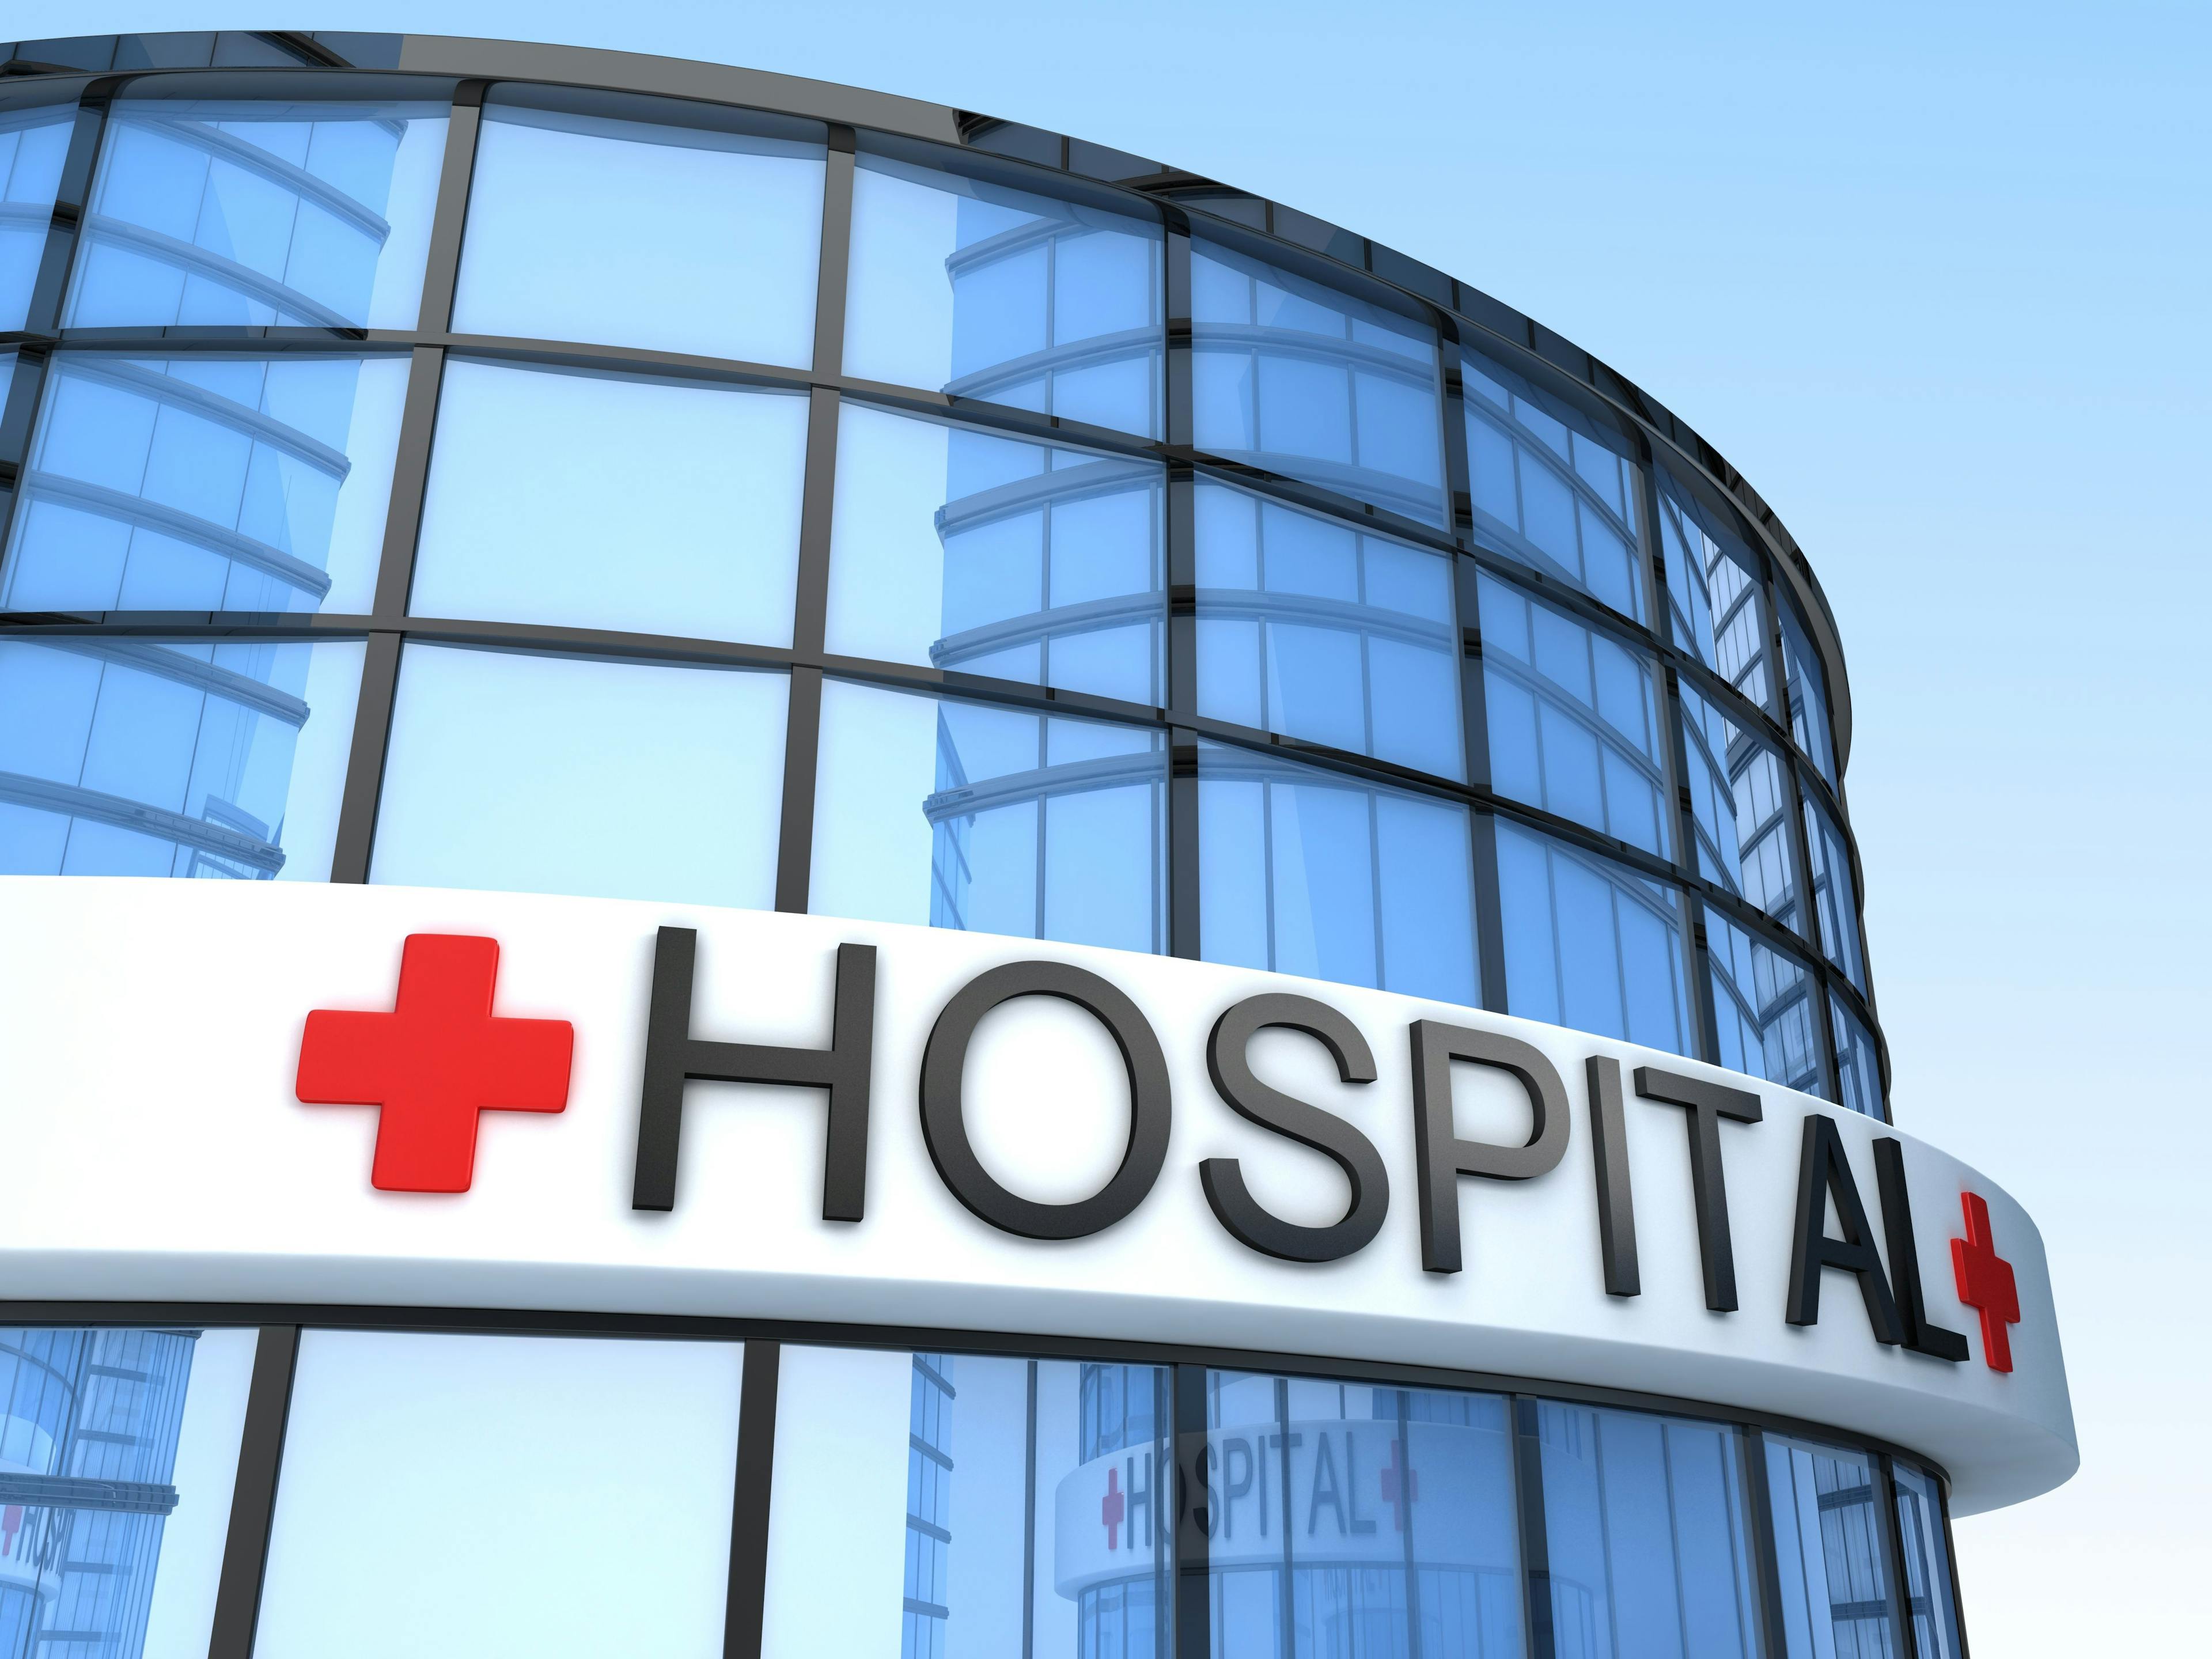 Credit rating agency labels nonprofit hospital sector as deteriorating